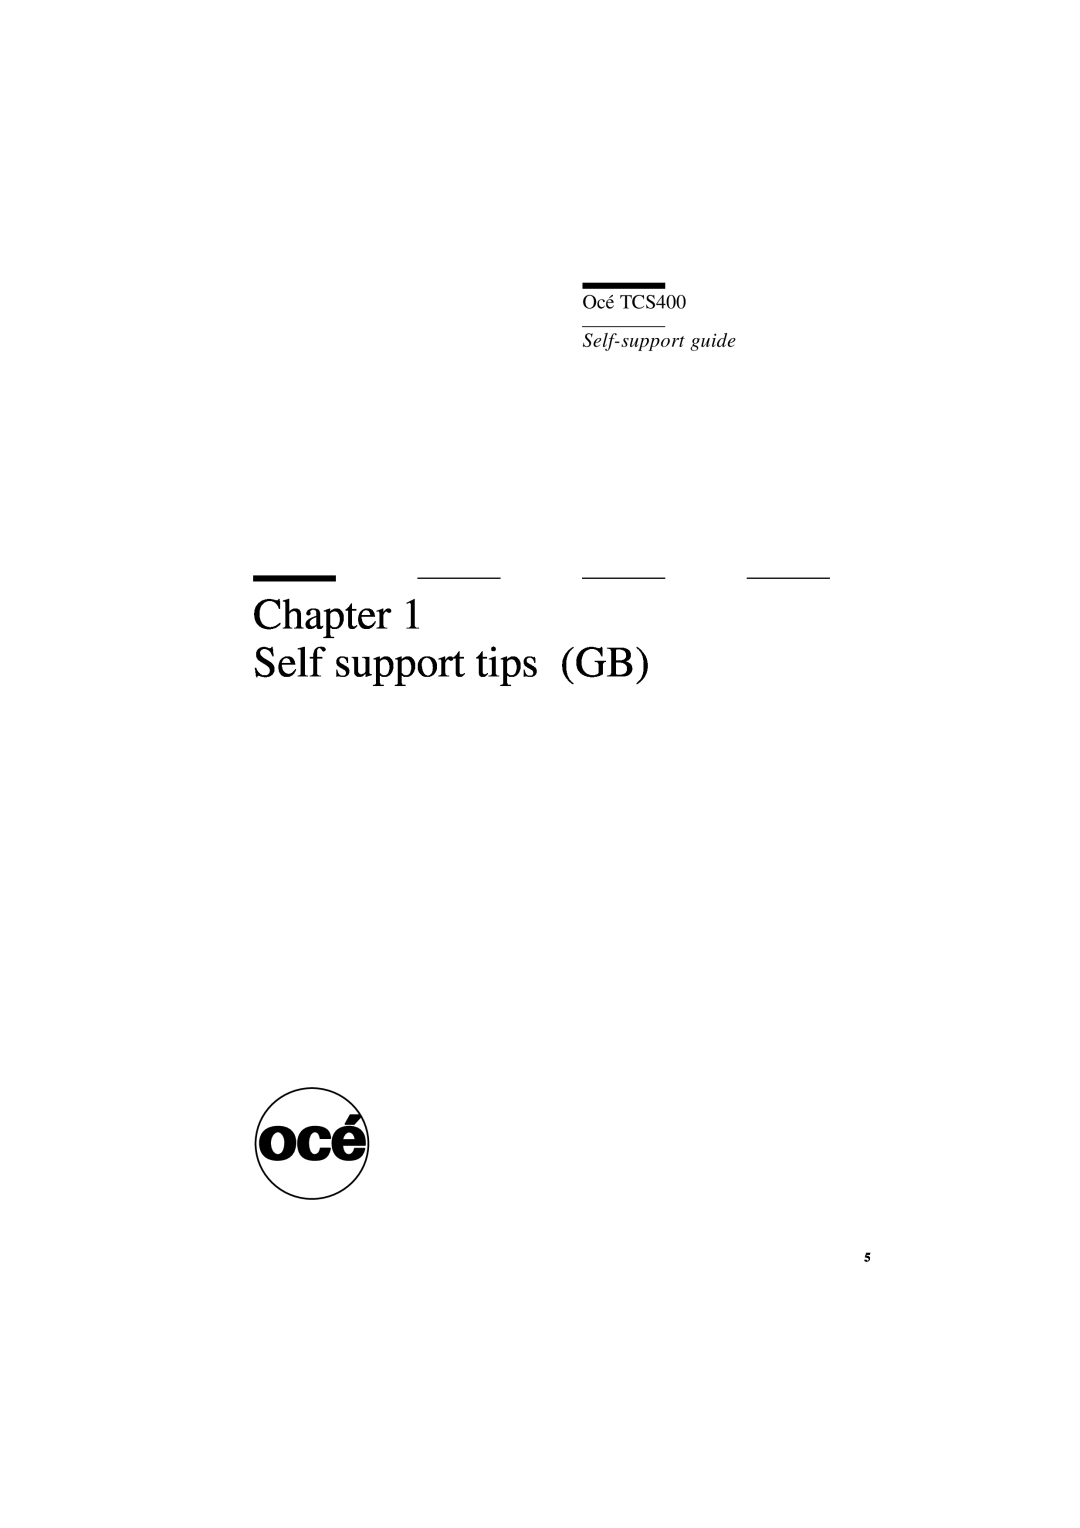 Oce North America manual Chapter Self support tips GB, Océ TCS400, Self-support guide 